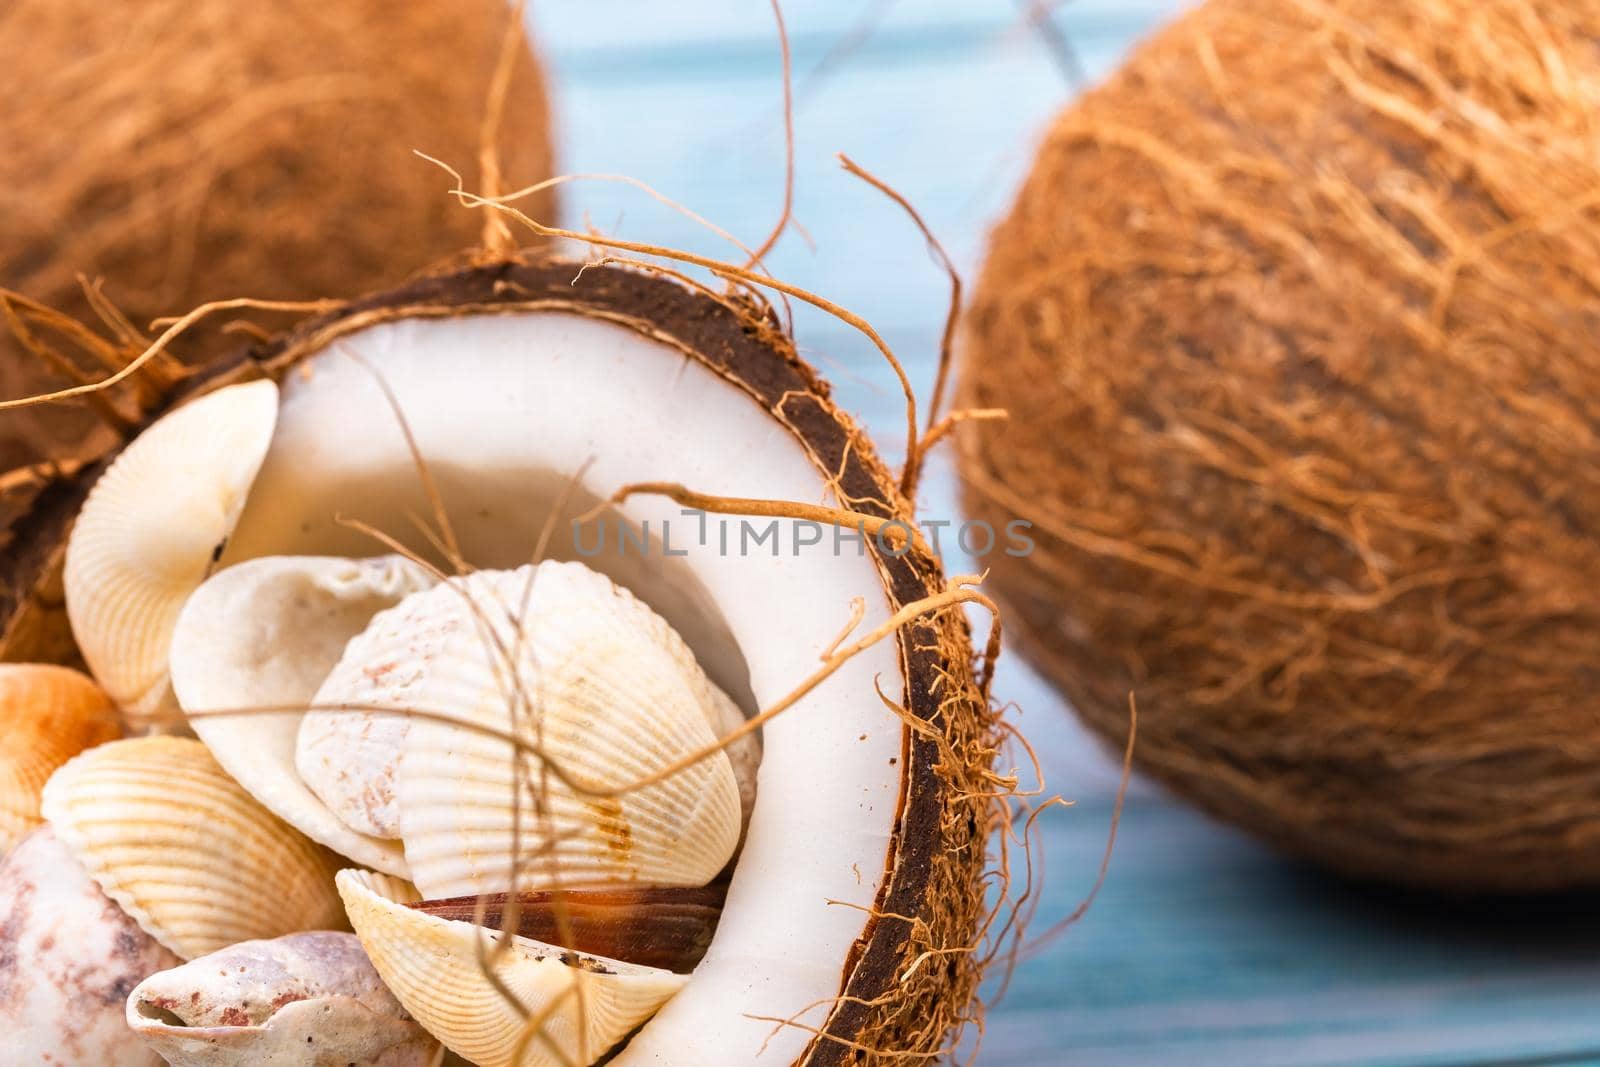 coconuts and seashells on a blue wooden background .Marine theme by Lobachad